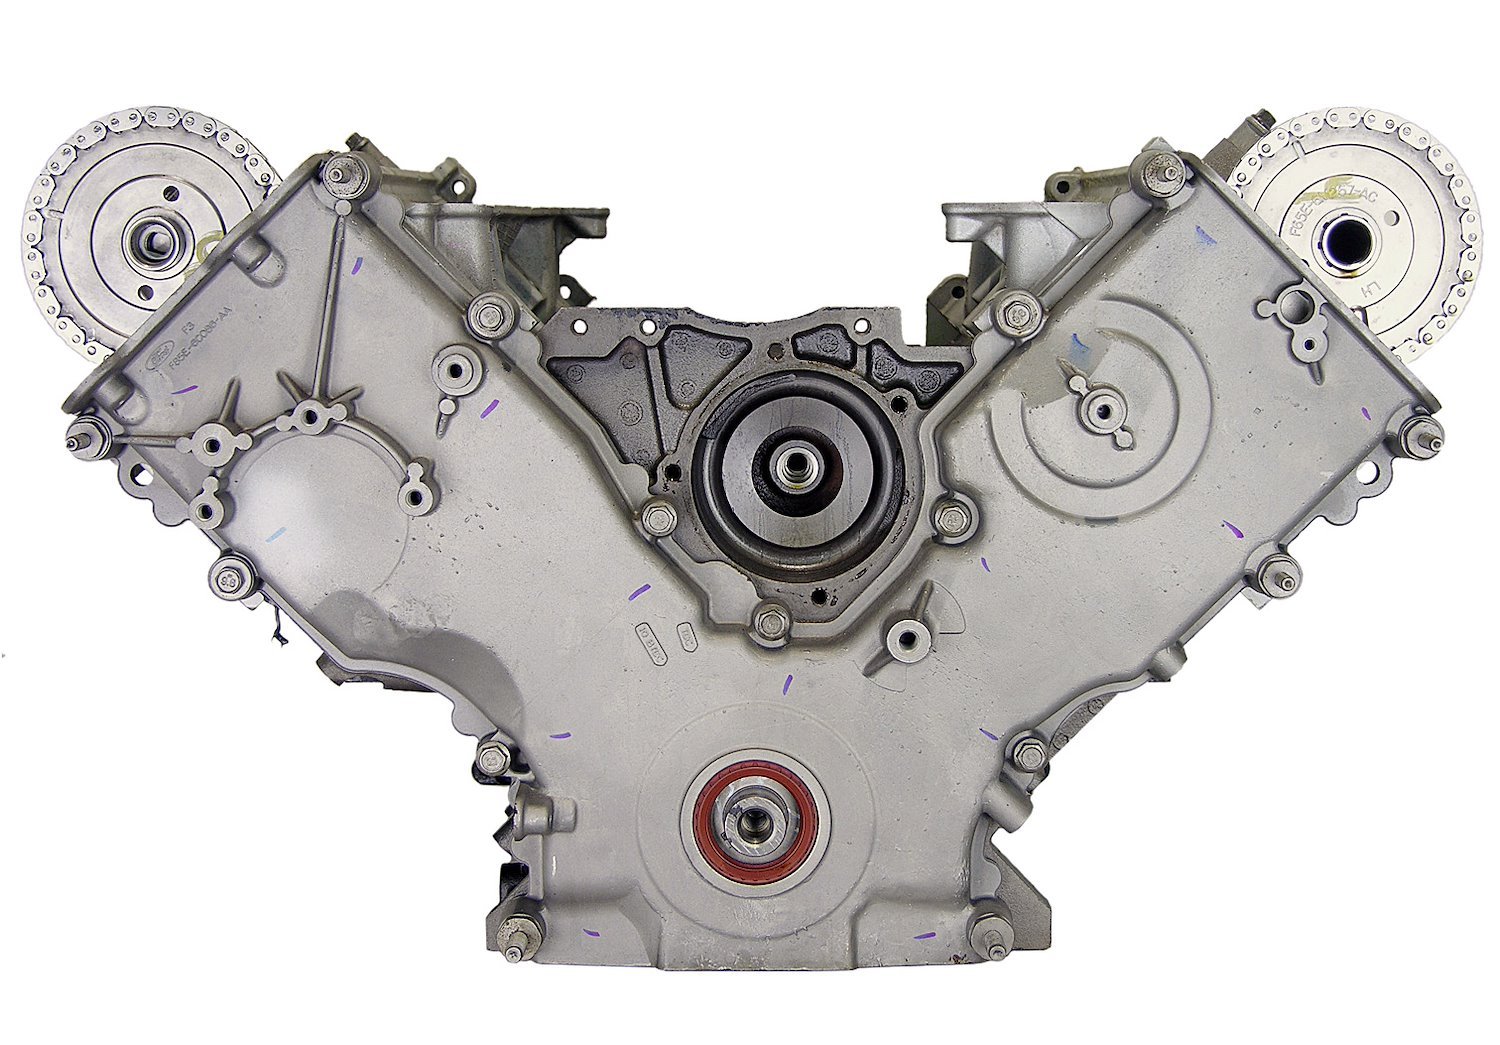 Remanufactured Crate Engine for 1999-2001 Ford F-Series Truck,